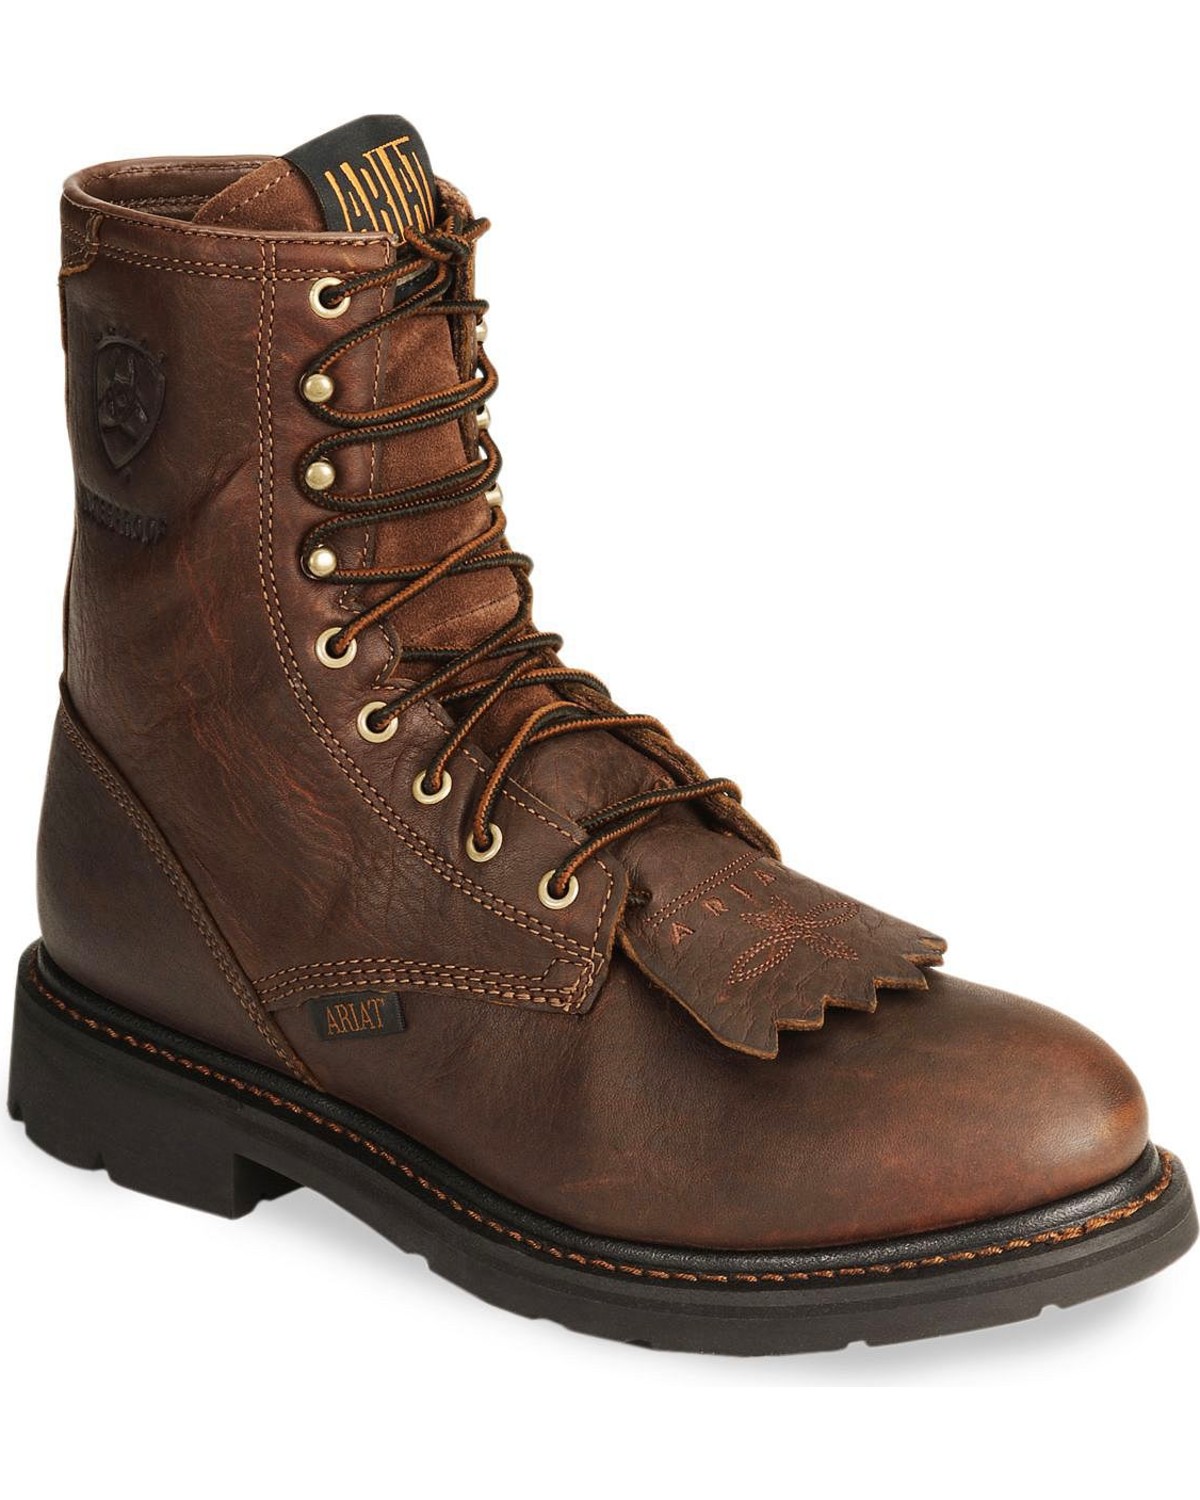 Ariat Waterproof Cascade H20 8" Lace-Up Work Boots - Round Soft Toe